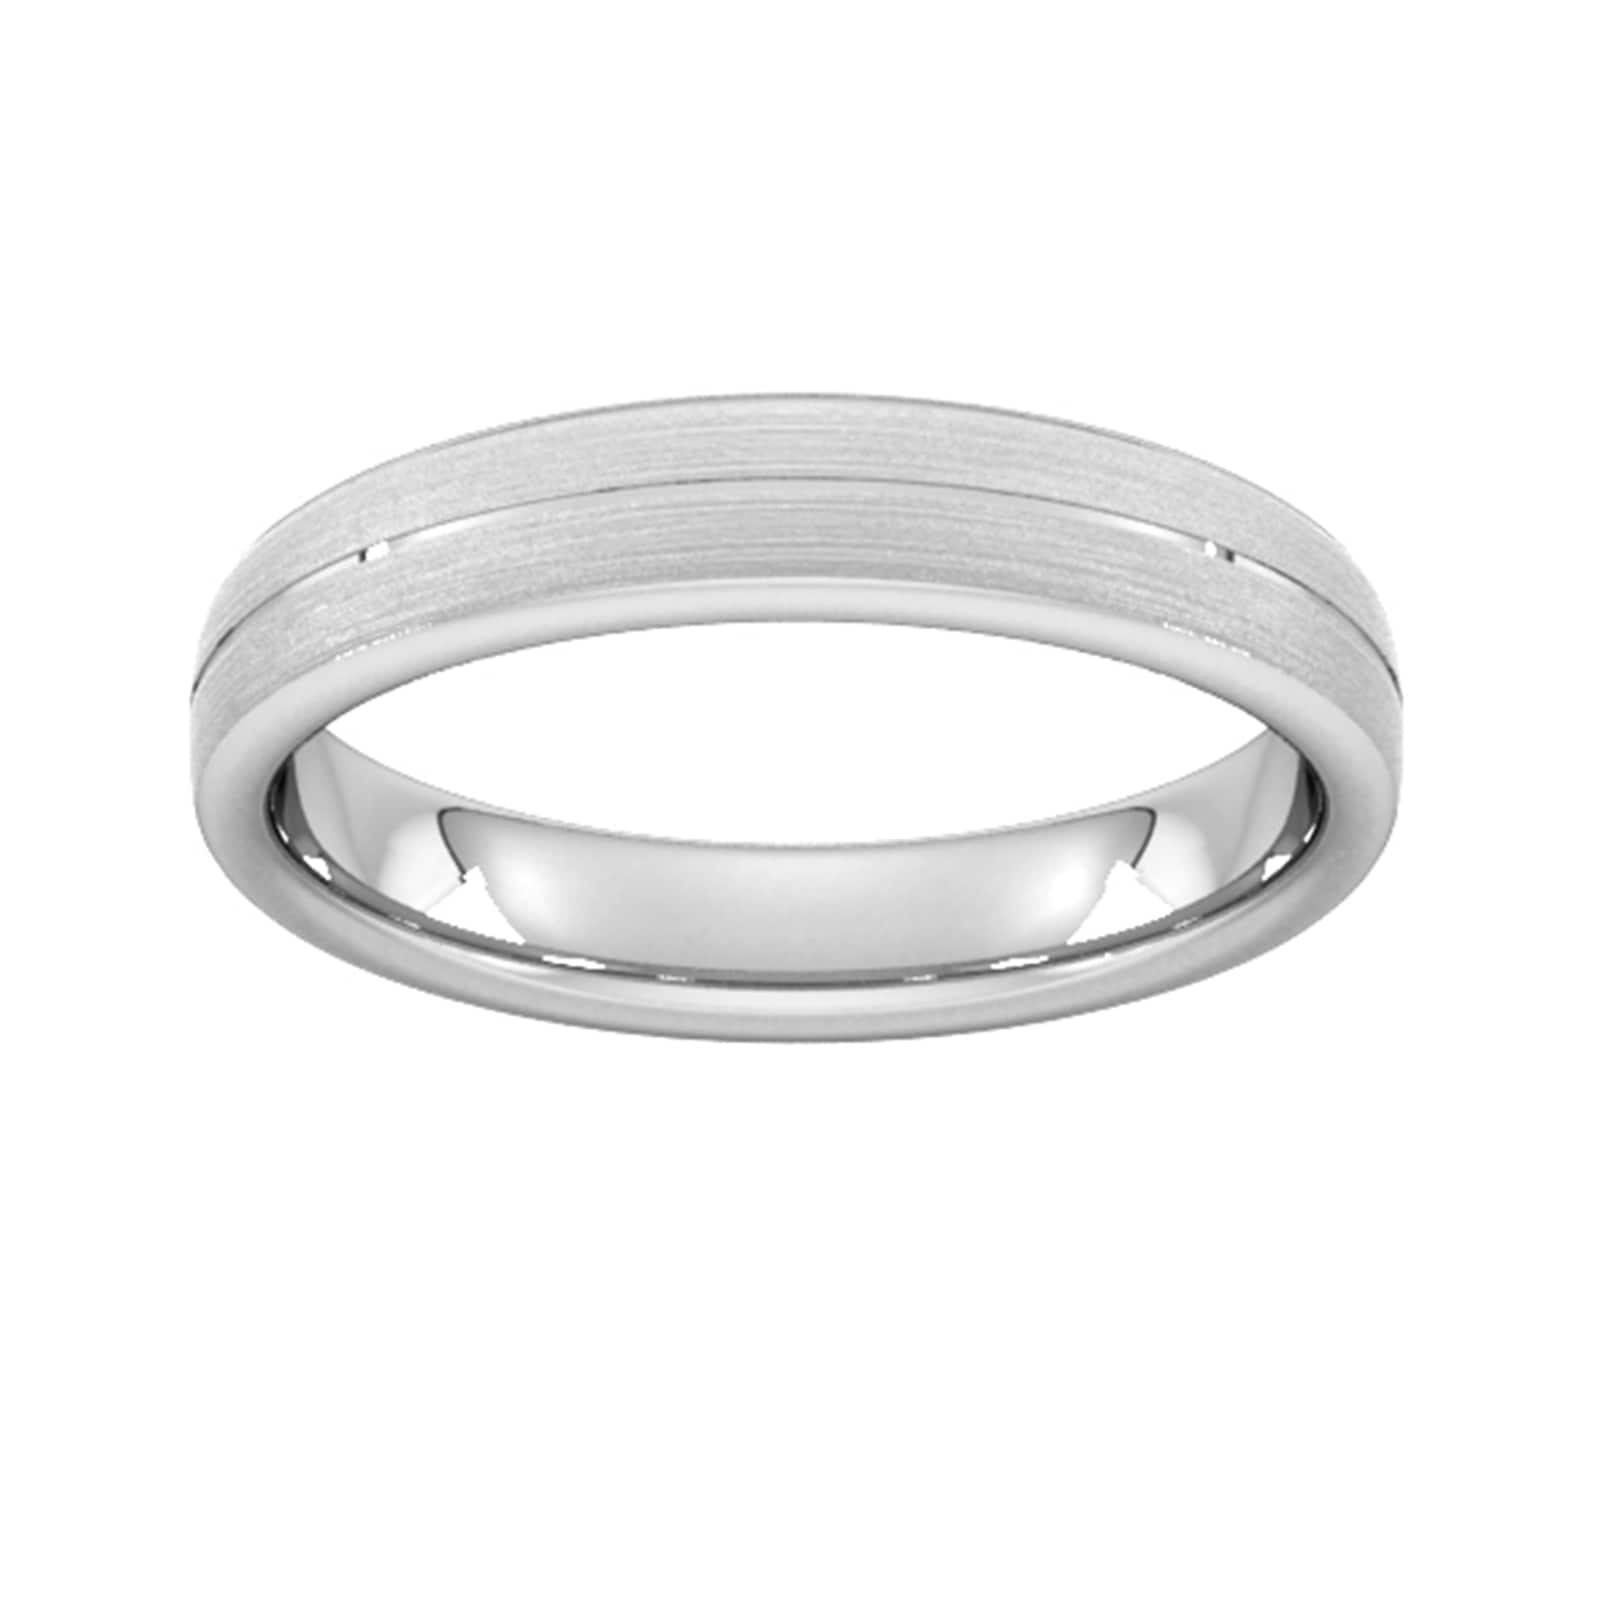 4mm Slight Court Heavy Centre Groove With Chamfered Edge Wedding Ring In 950 Palladium - Ring Size P